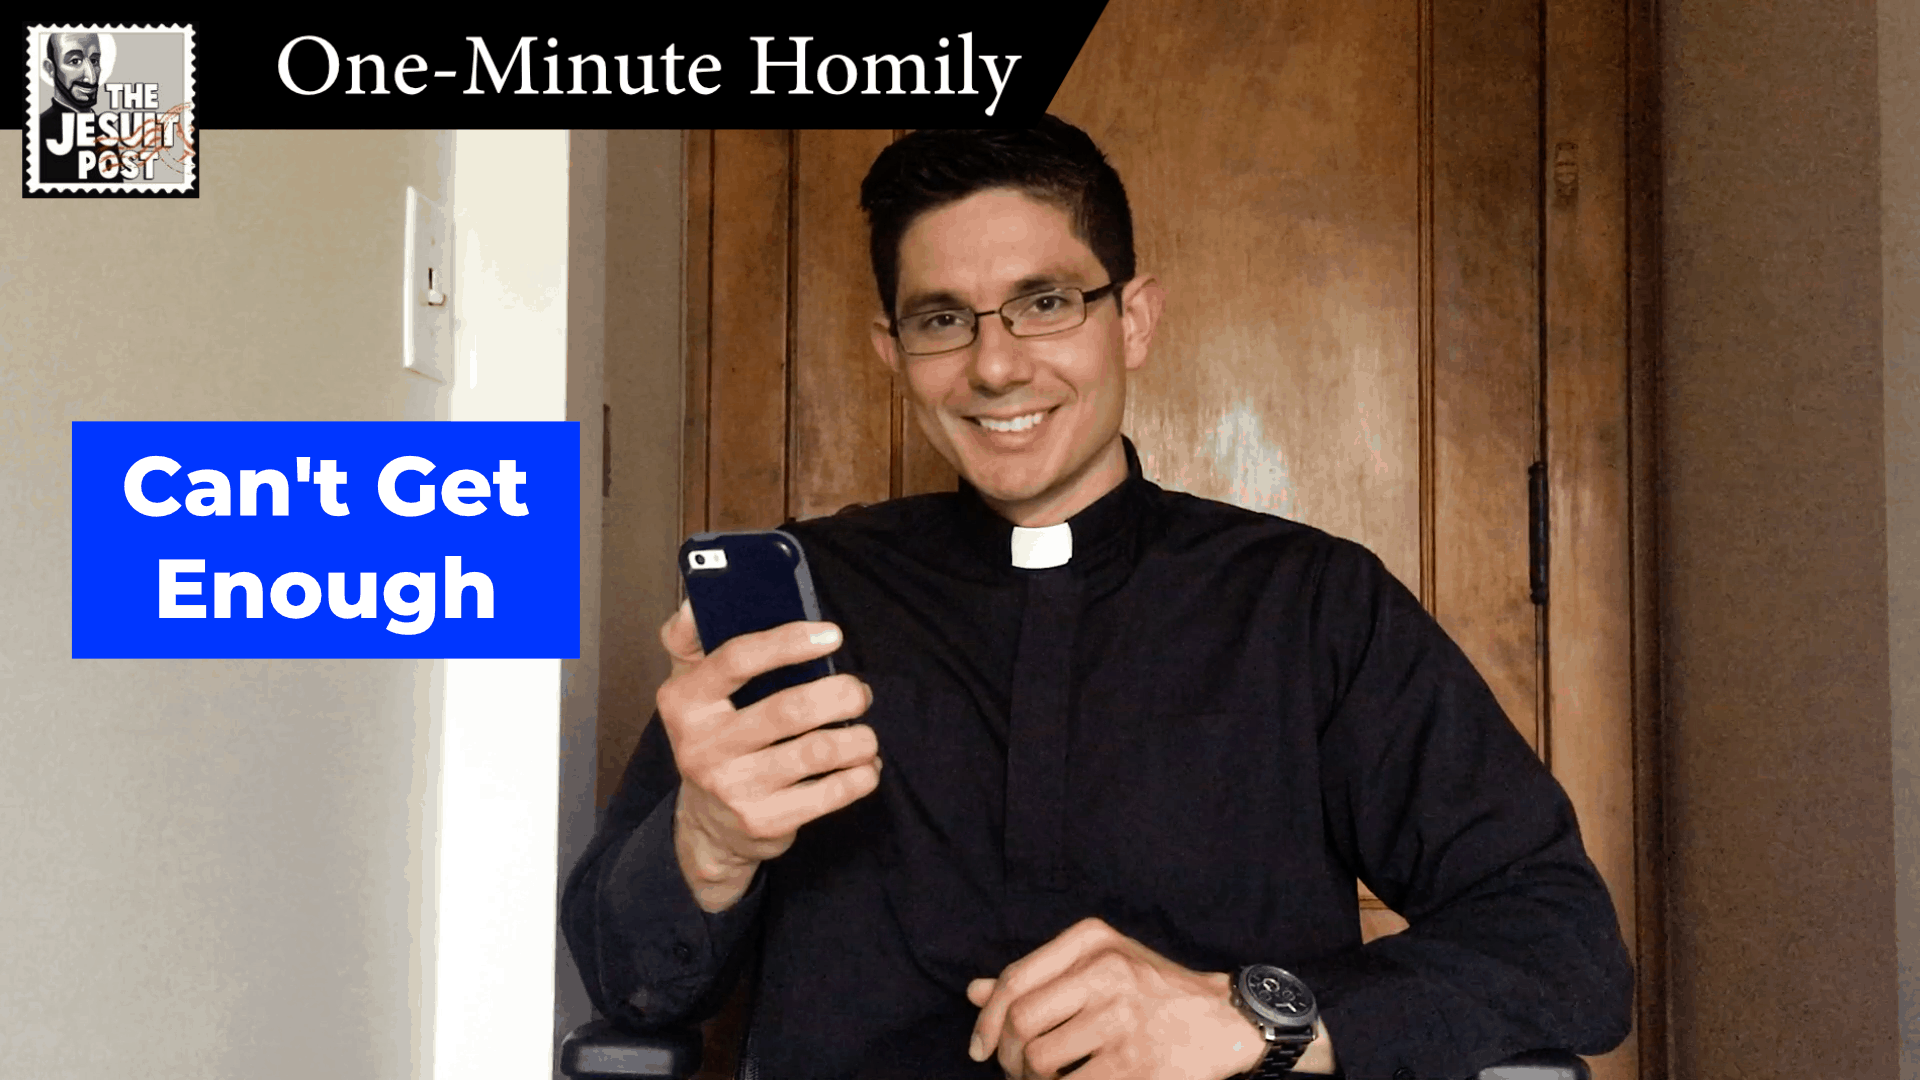 One-Minute Homily: “Can’t Get Enough”